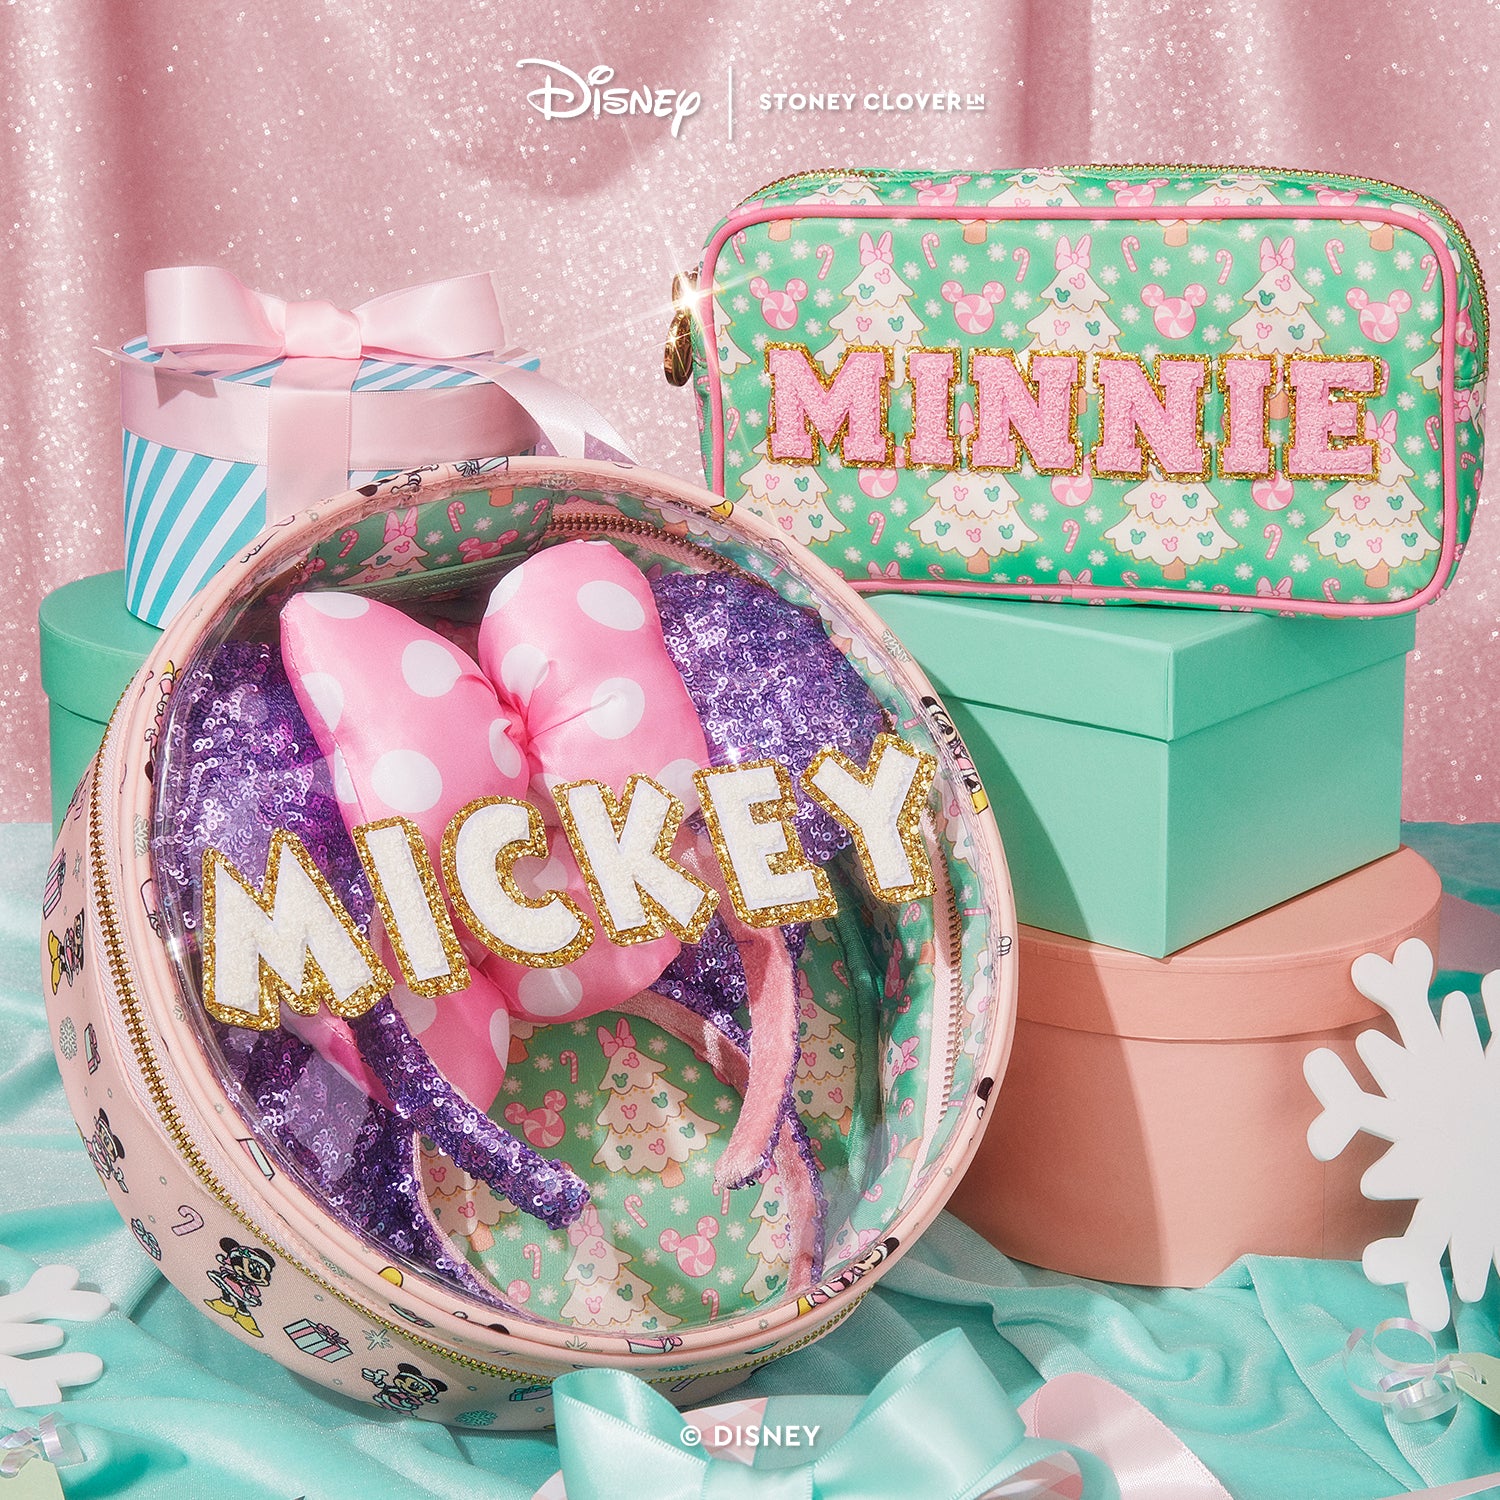 The NEW Stoney Clover Disney Collection is Selling Out FAST Online